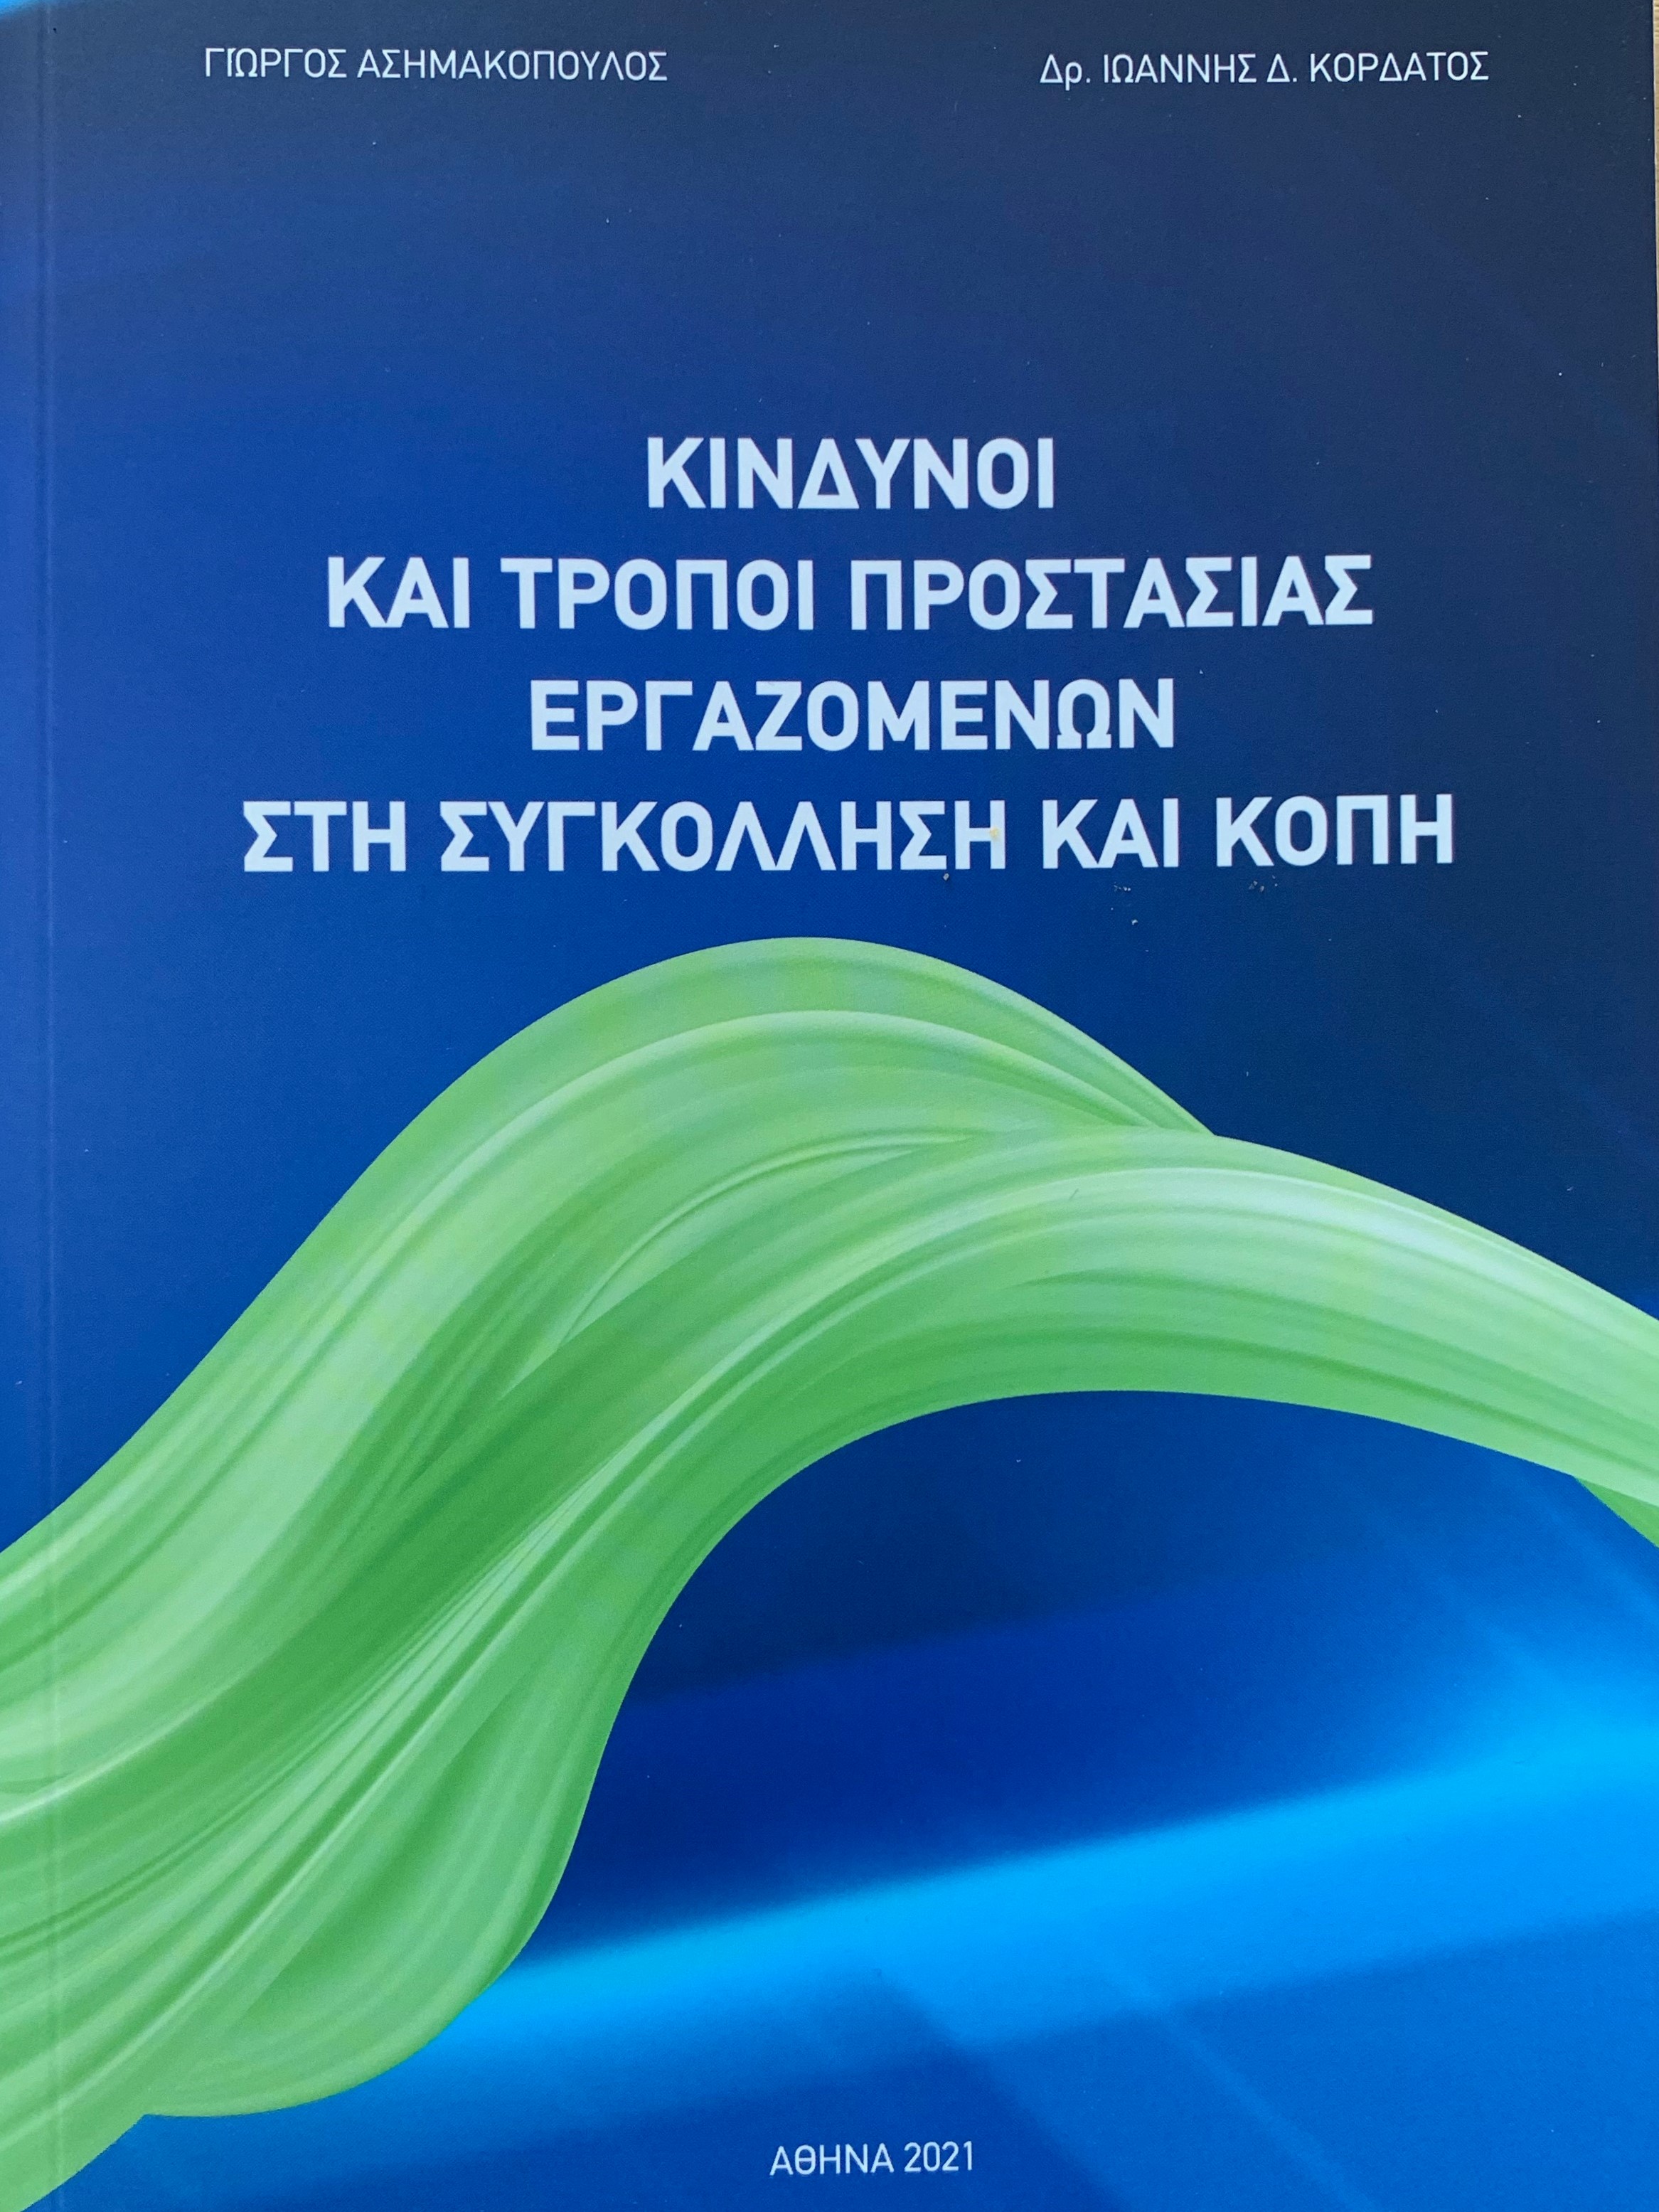 Risks And Means Of Protection In The Welding And Cutting Environment, an innovative book  authored by Dr. Ioannis Kordatos & Mr. George Assimacopoulos  